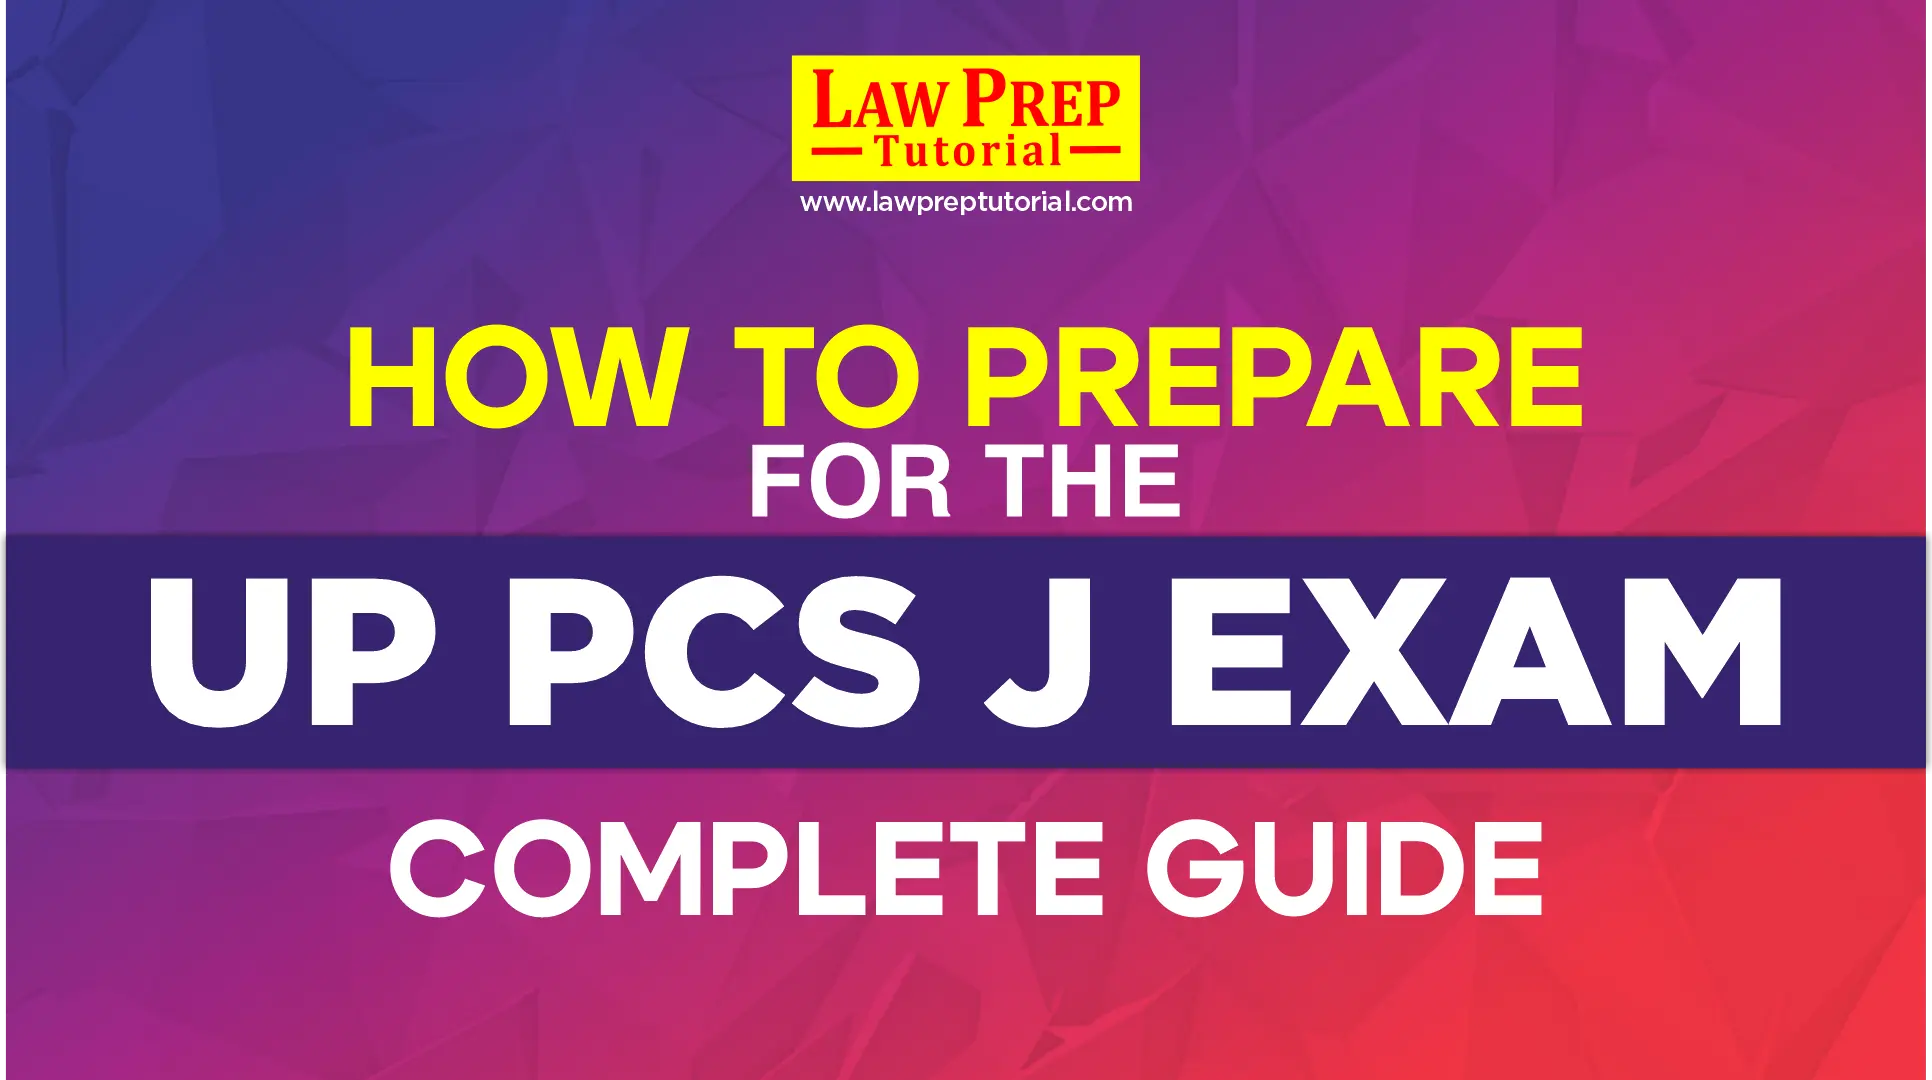 How To Prepare For UP PCS J Exam? – Complete Guide